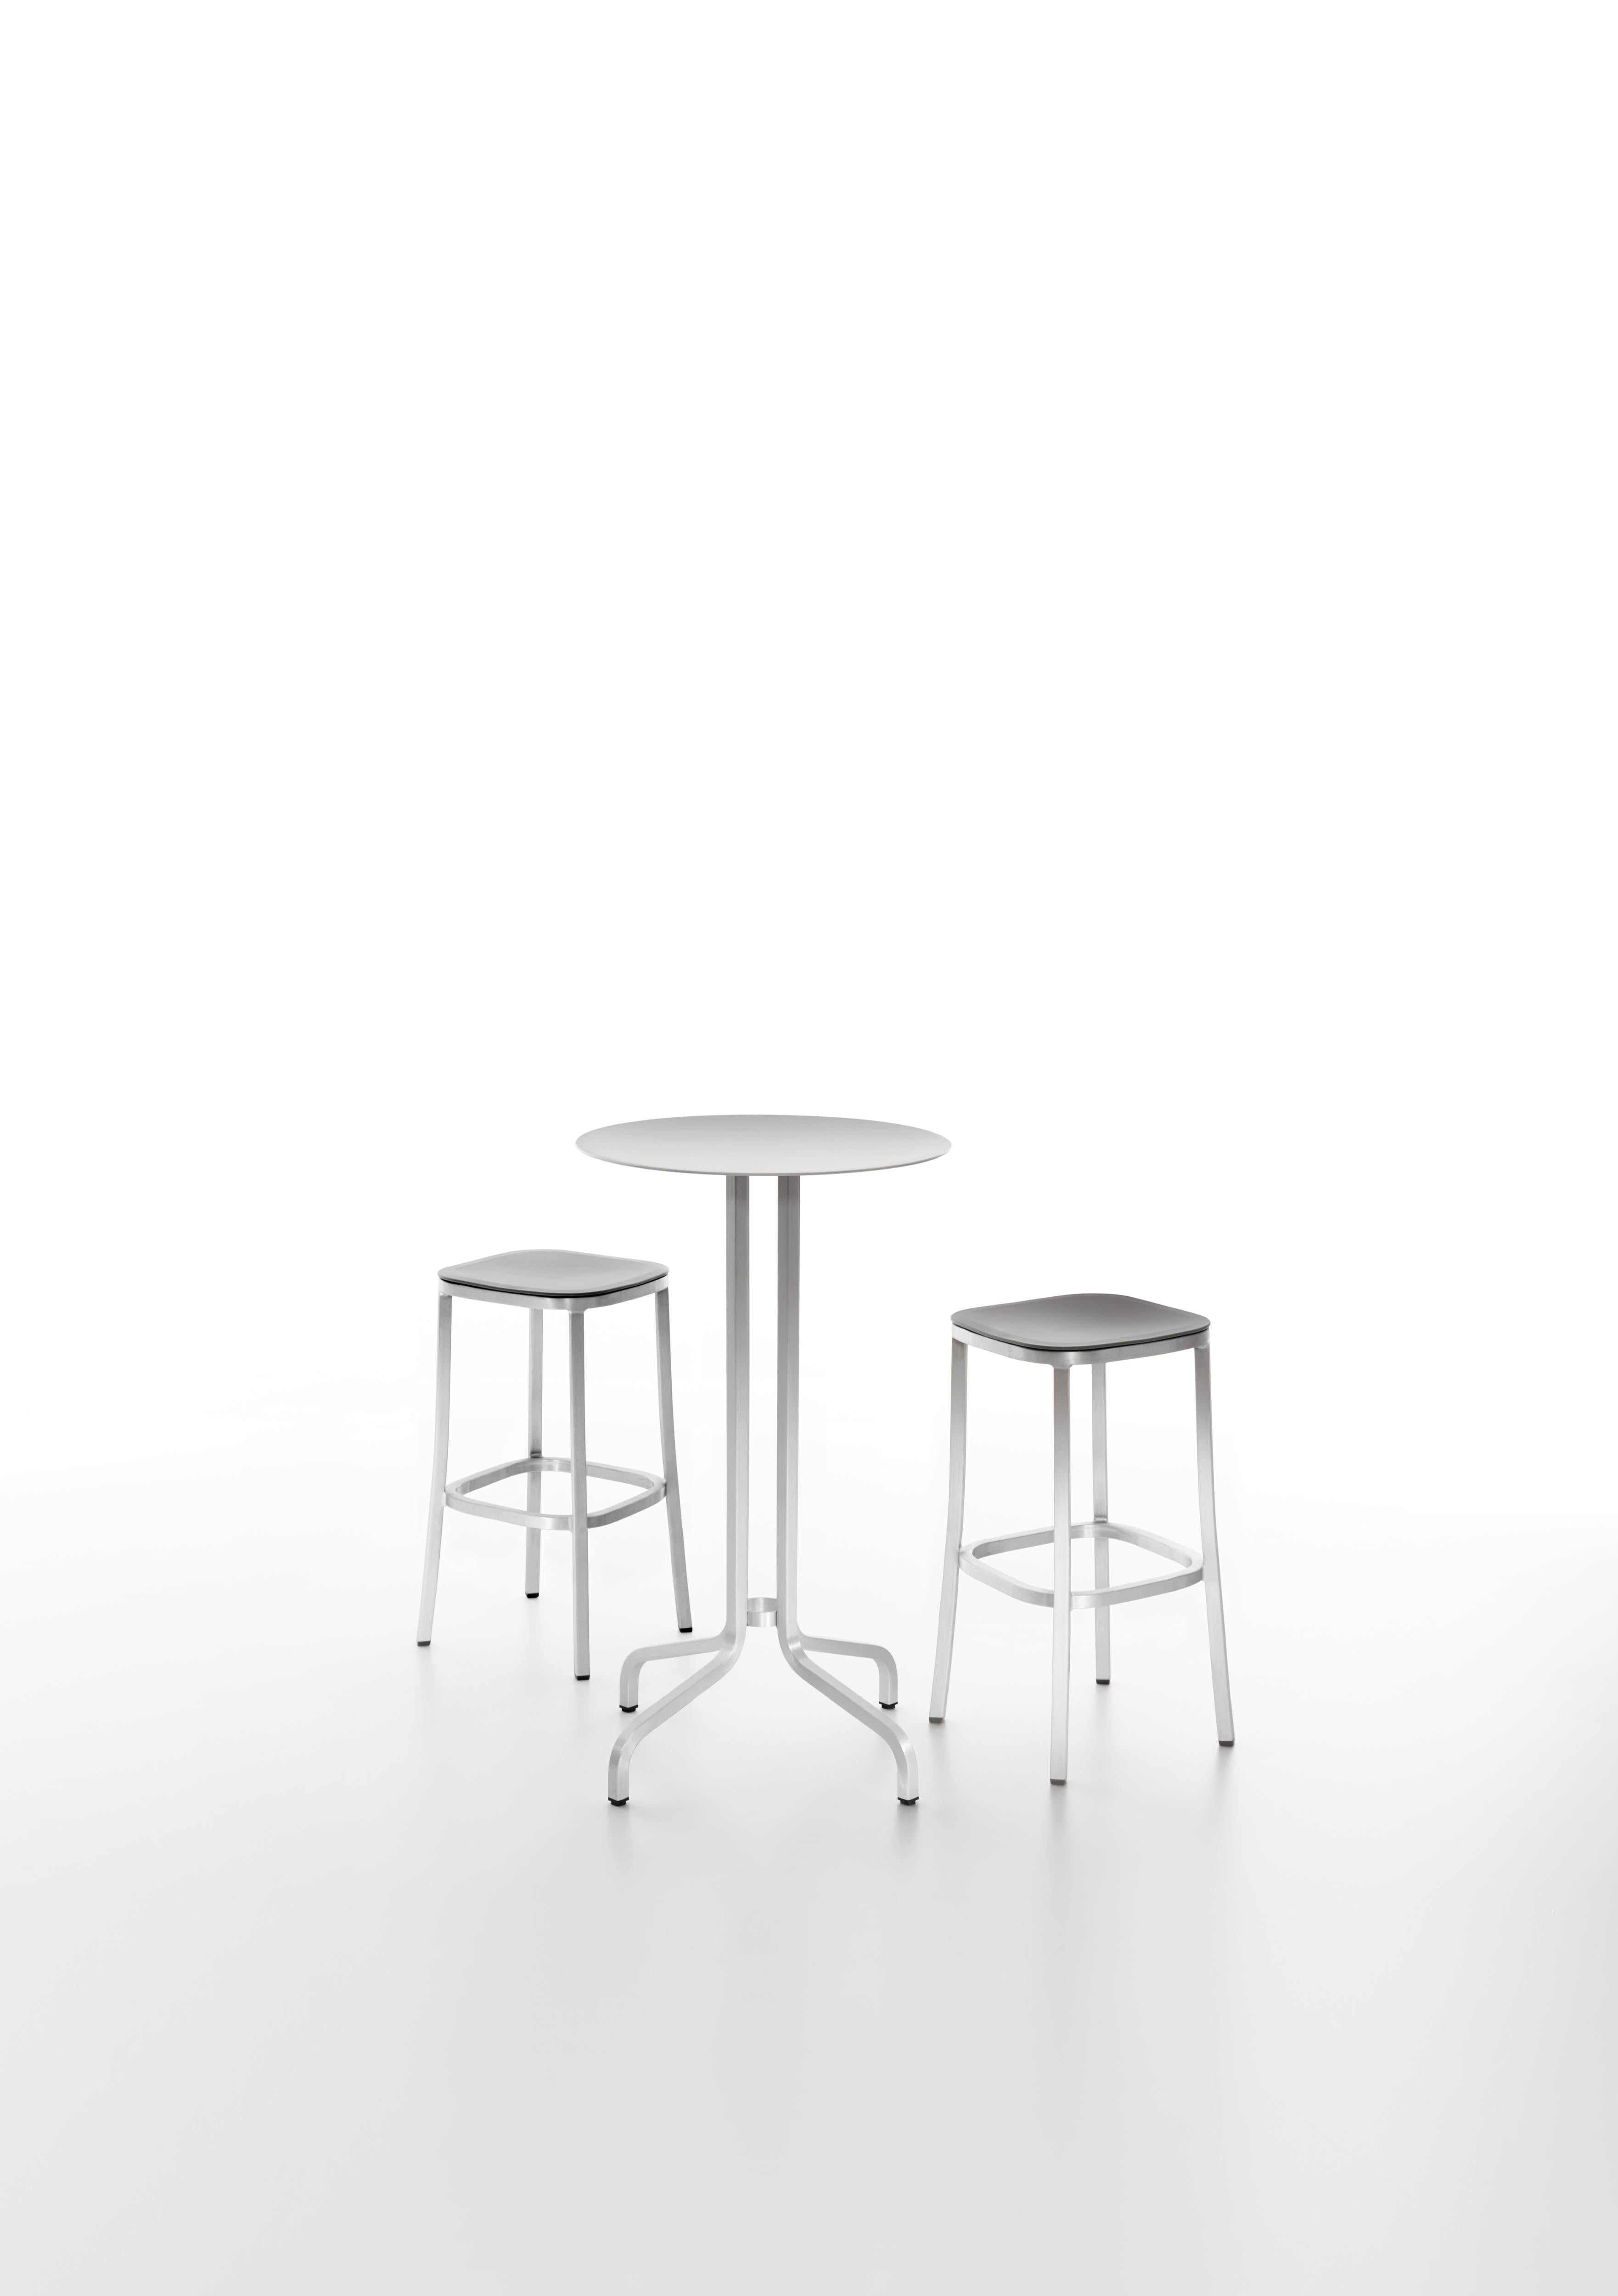 Emeco 1 Inch Barstool in Dark Powder-Coated Aluminum and Ash by Jasper Morrison In New Condition For Sale In Hanover, PA